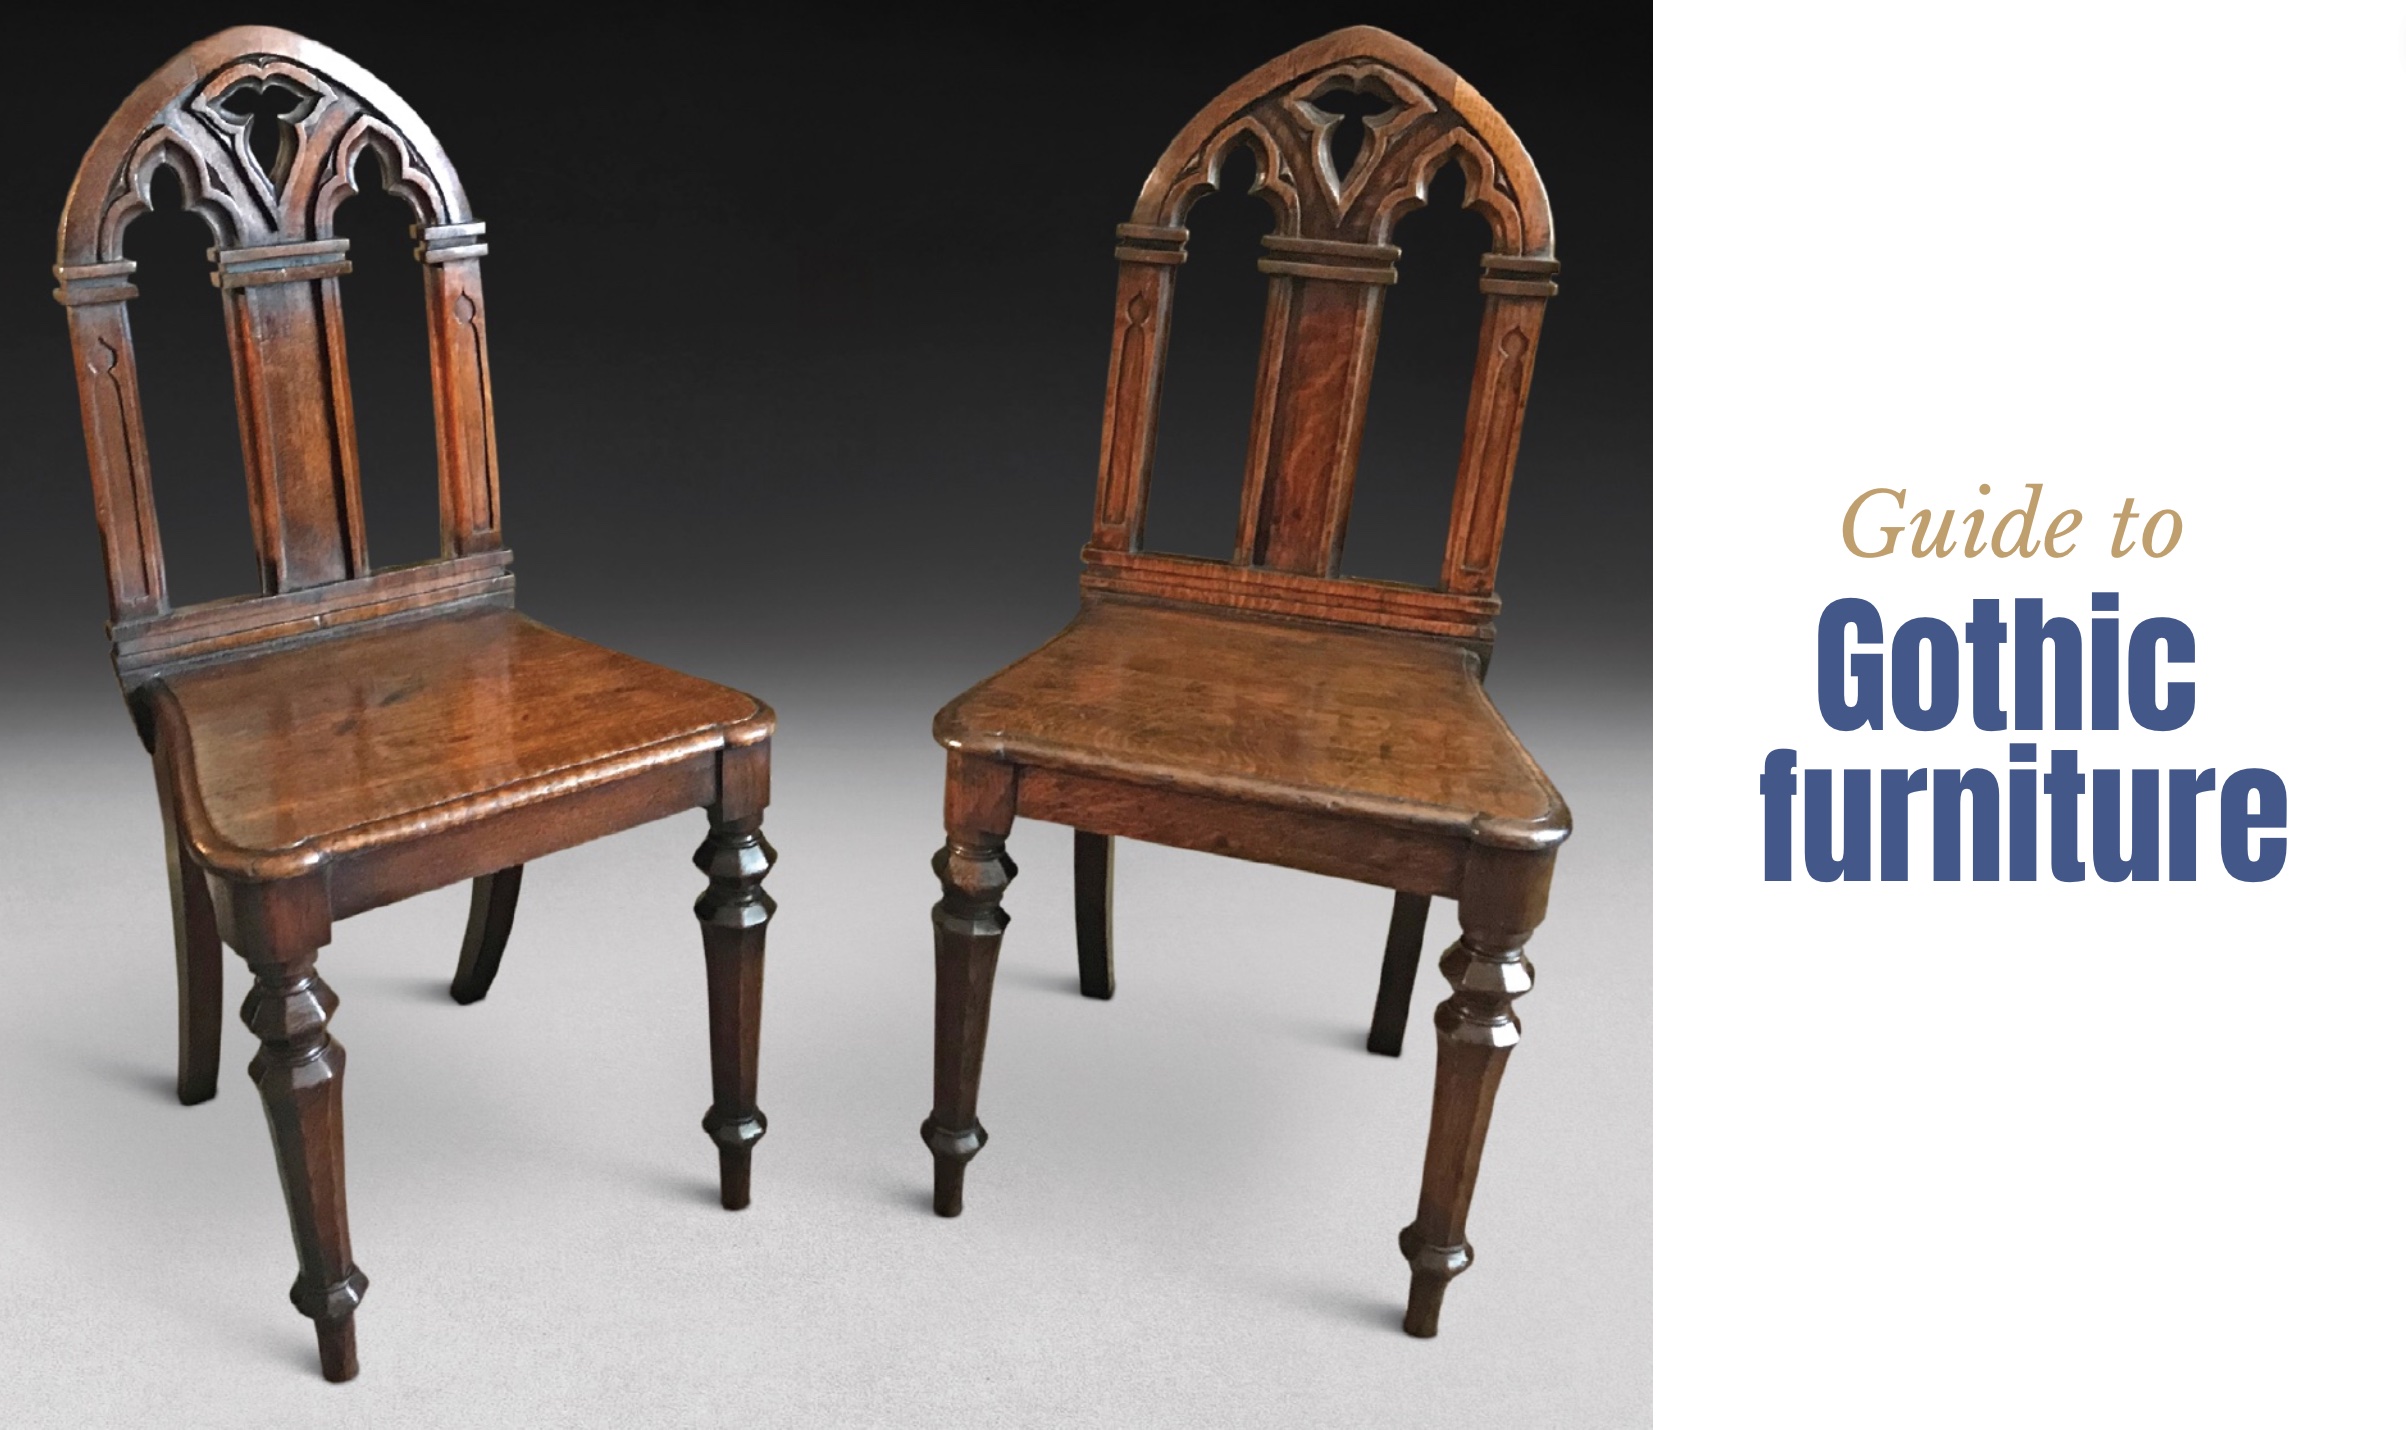 A guide to gothic furniture – Antique Collecting